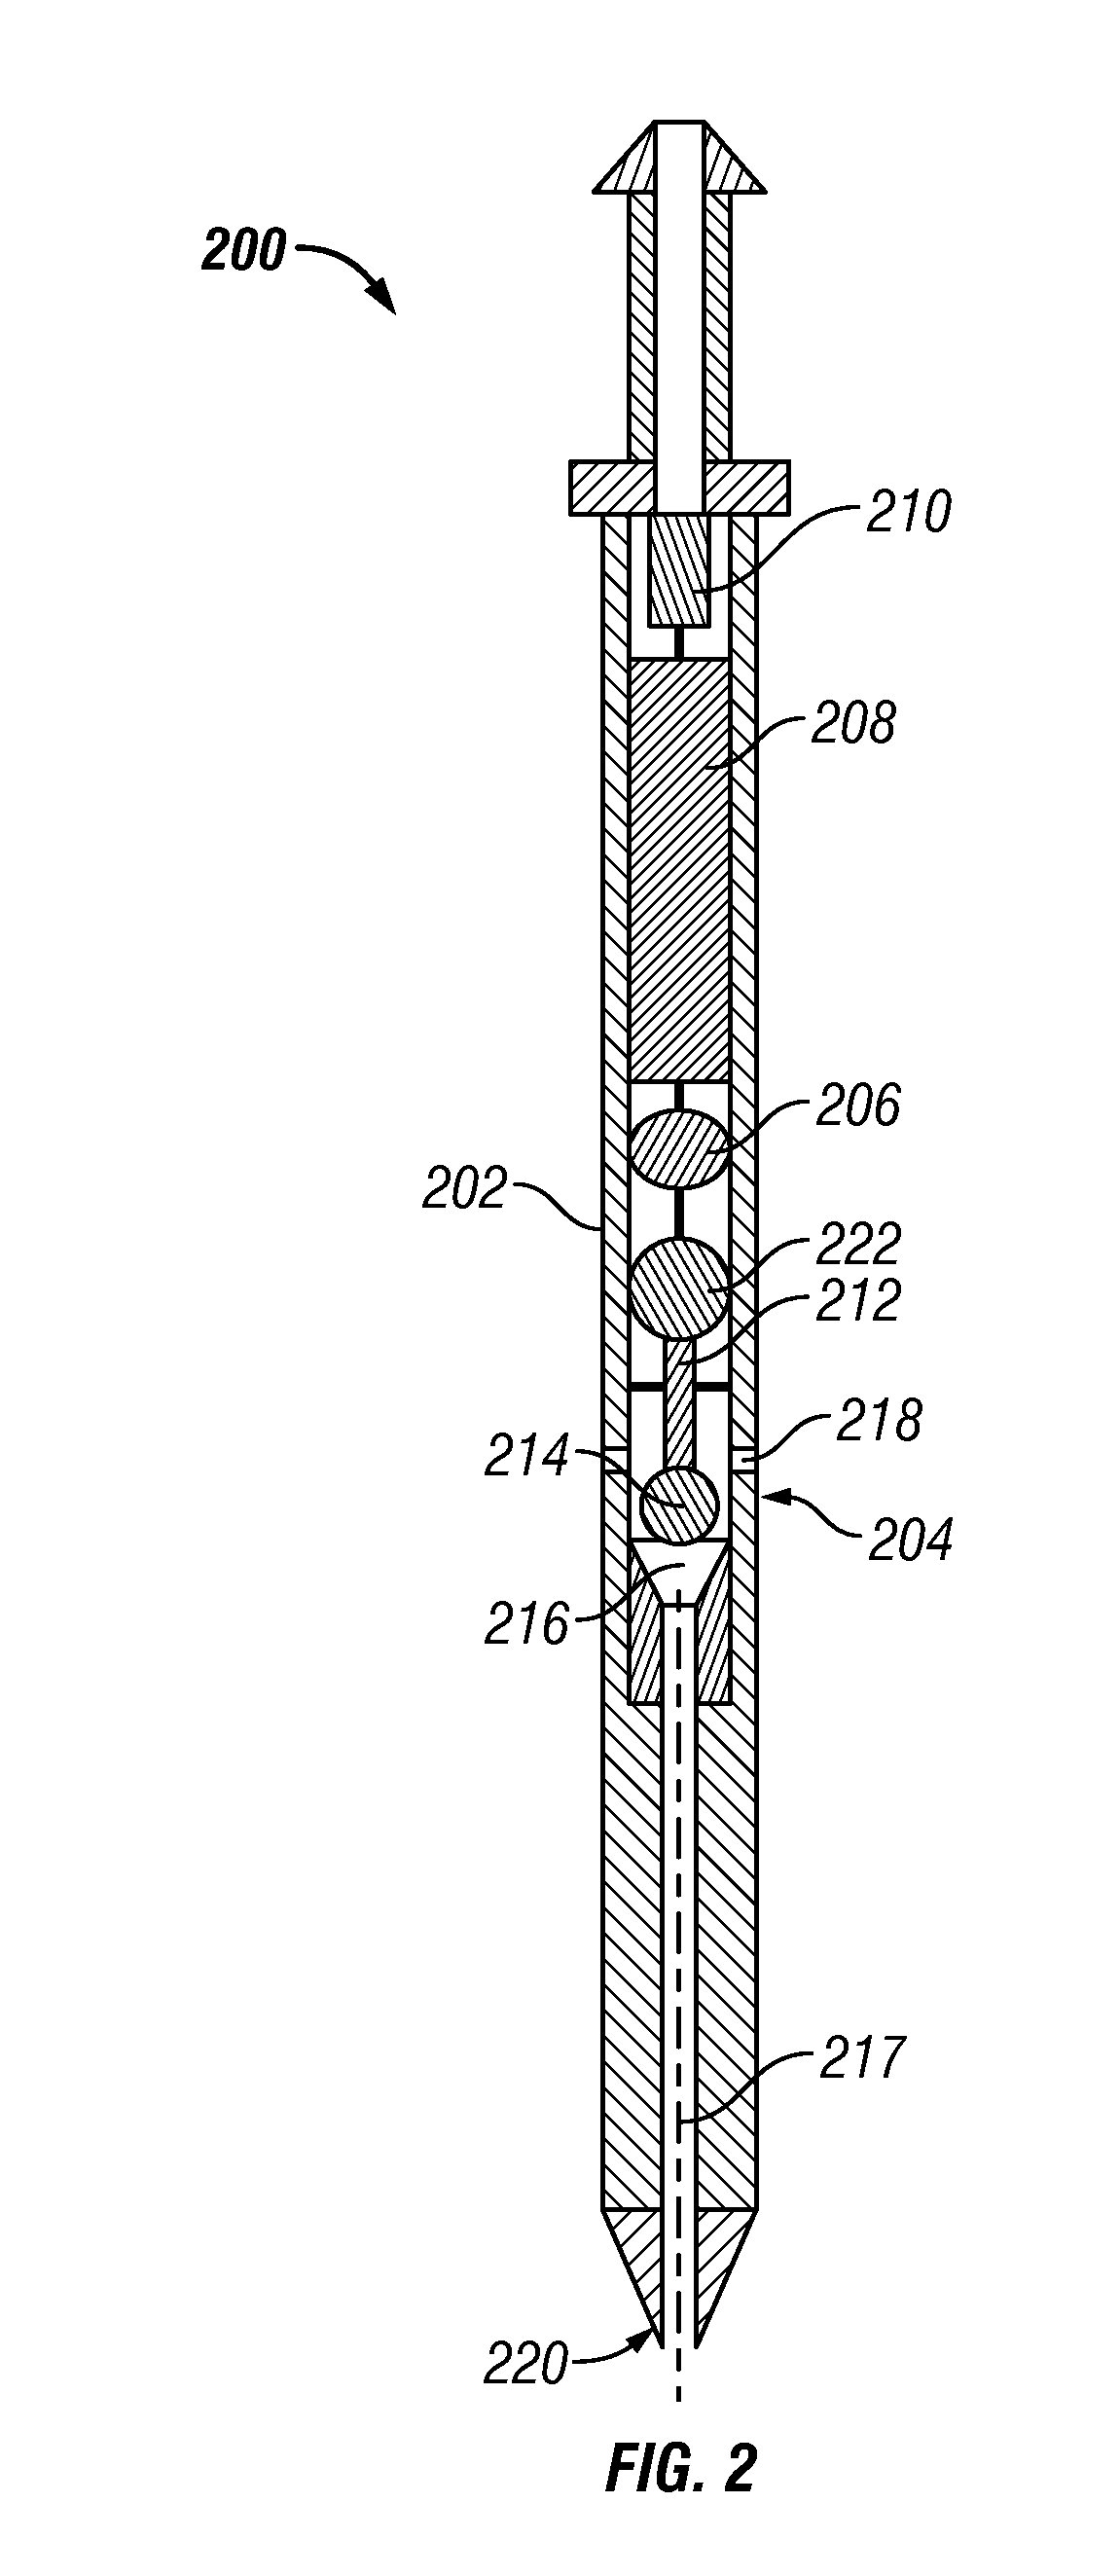 Battery-Powered and Logic-Controlled Gas Lift Valve for Use in Wells and Methods of Using and Making Same